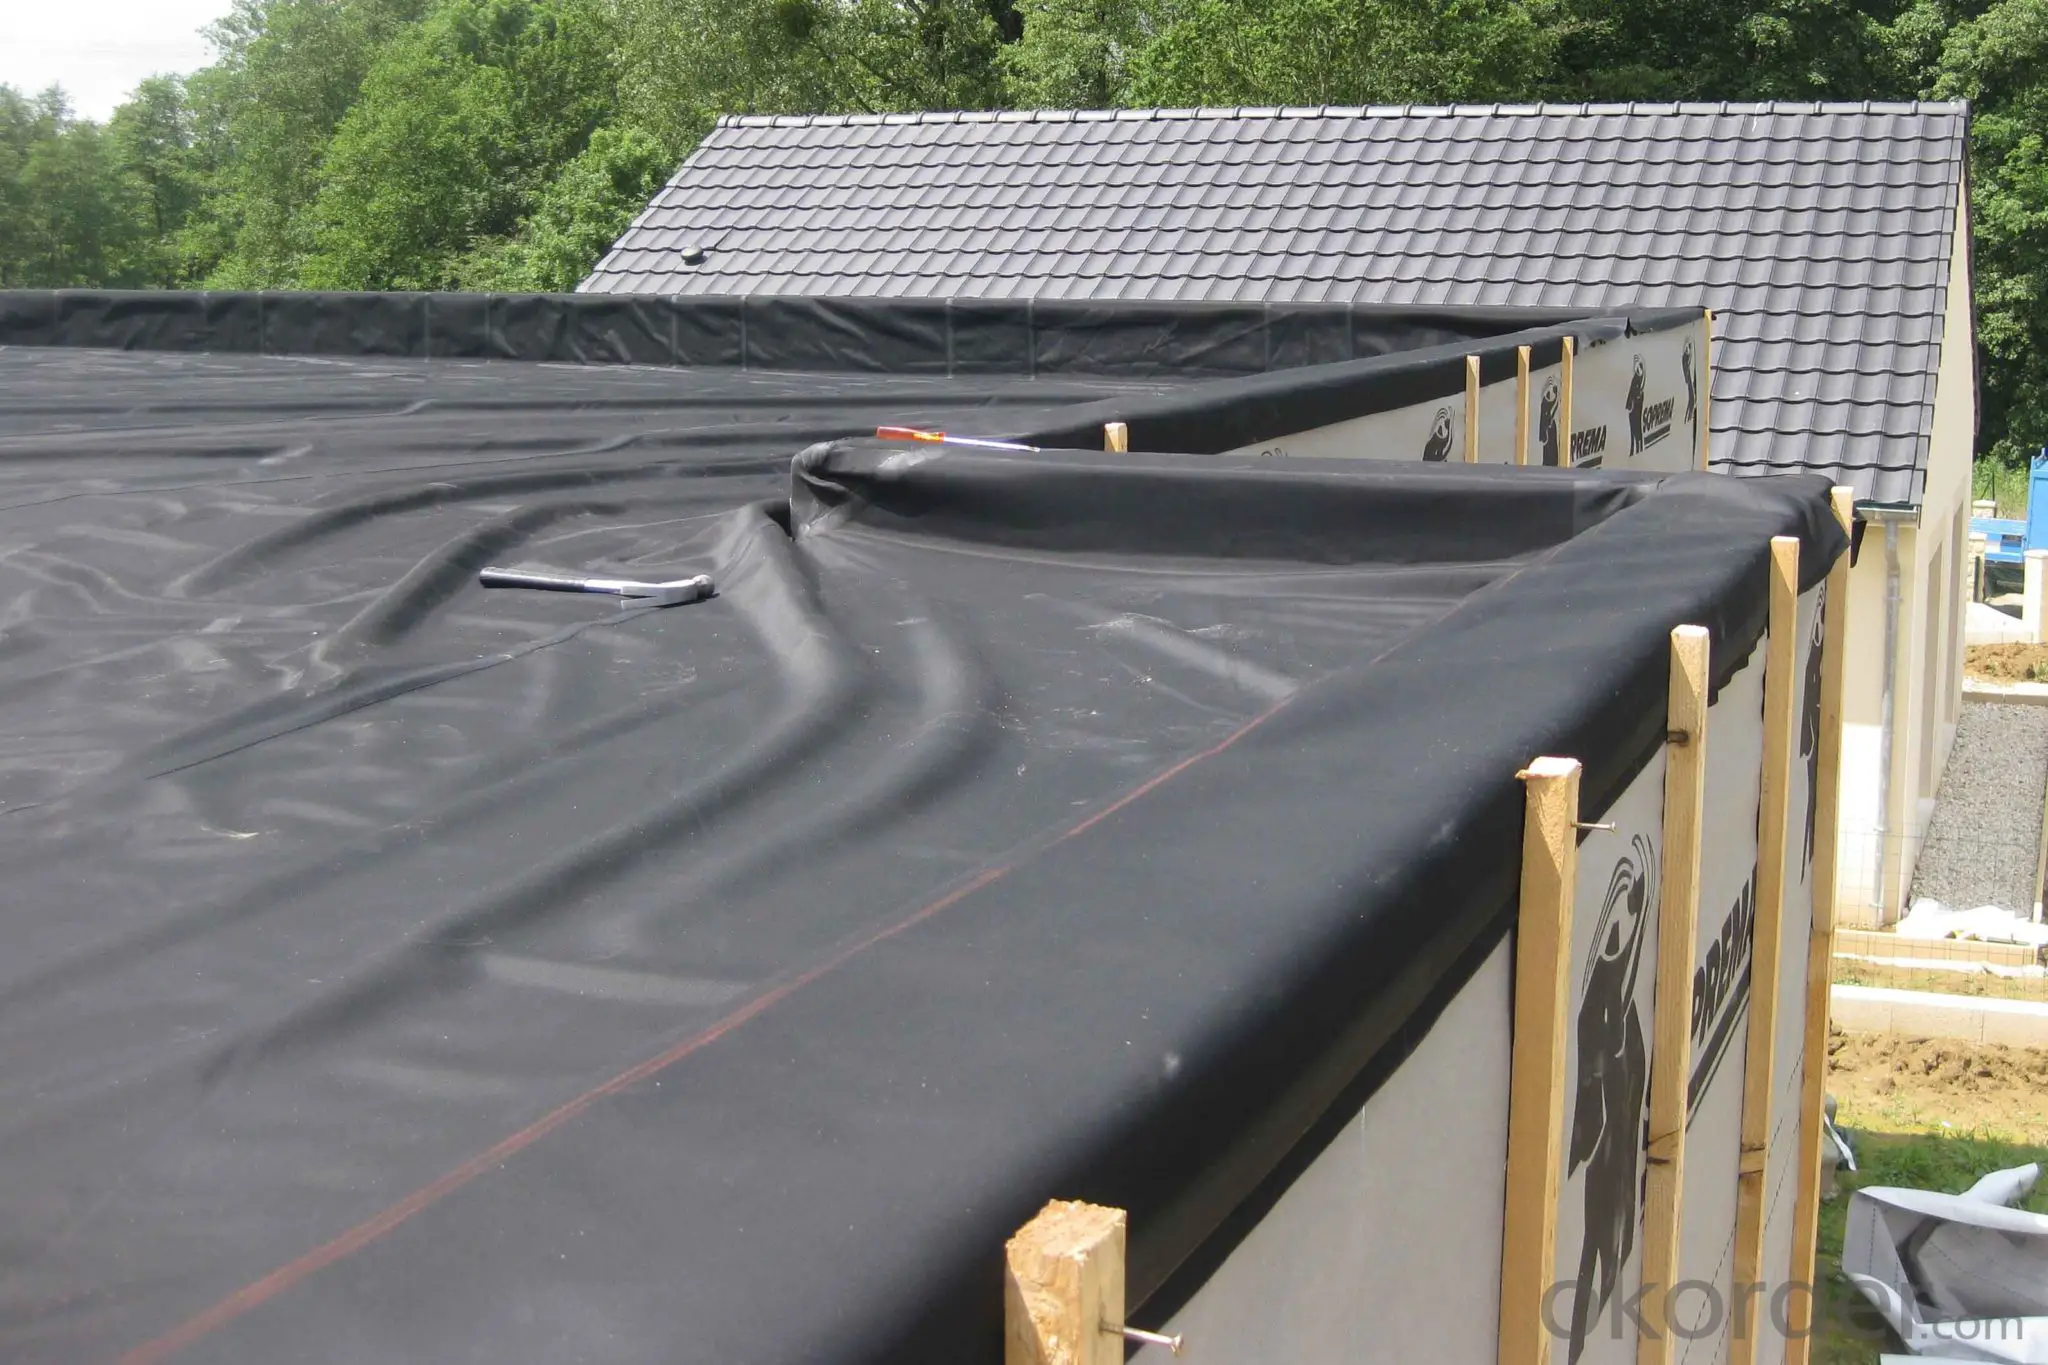 How much does a membrane roof cost?